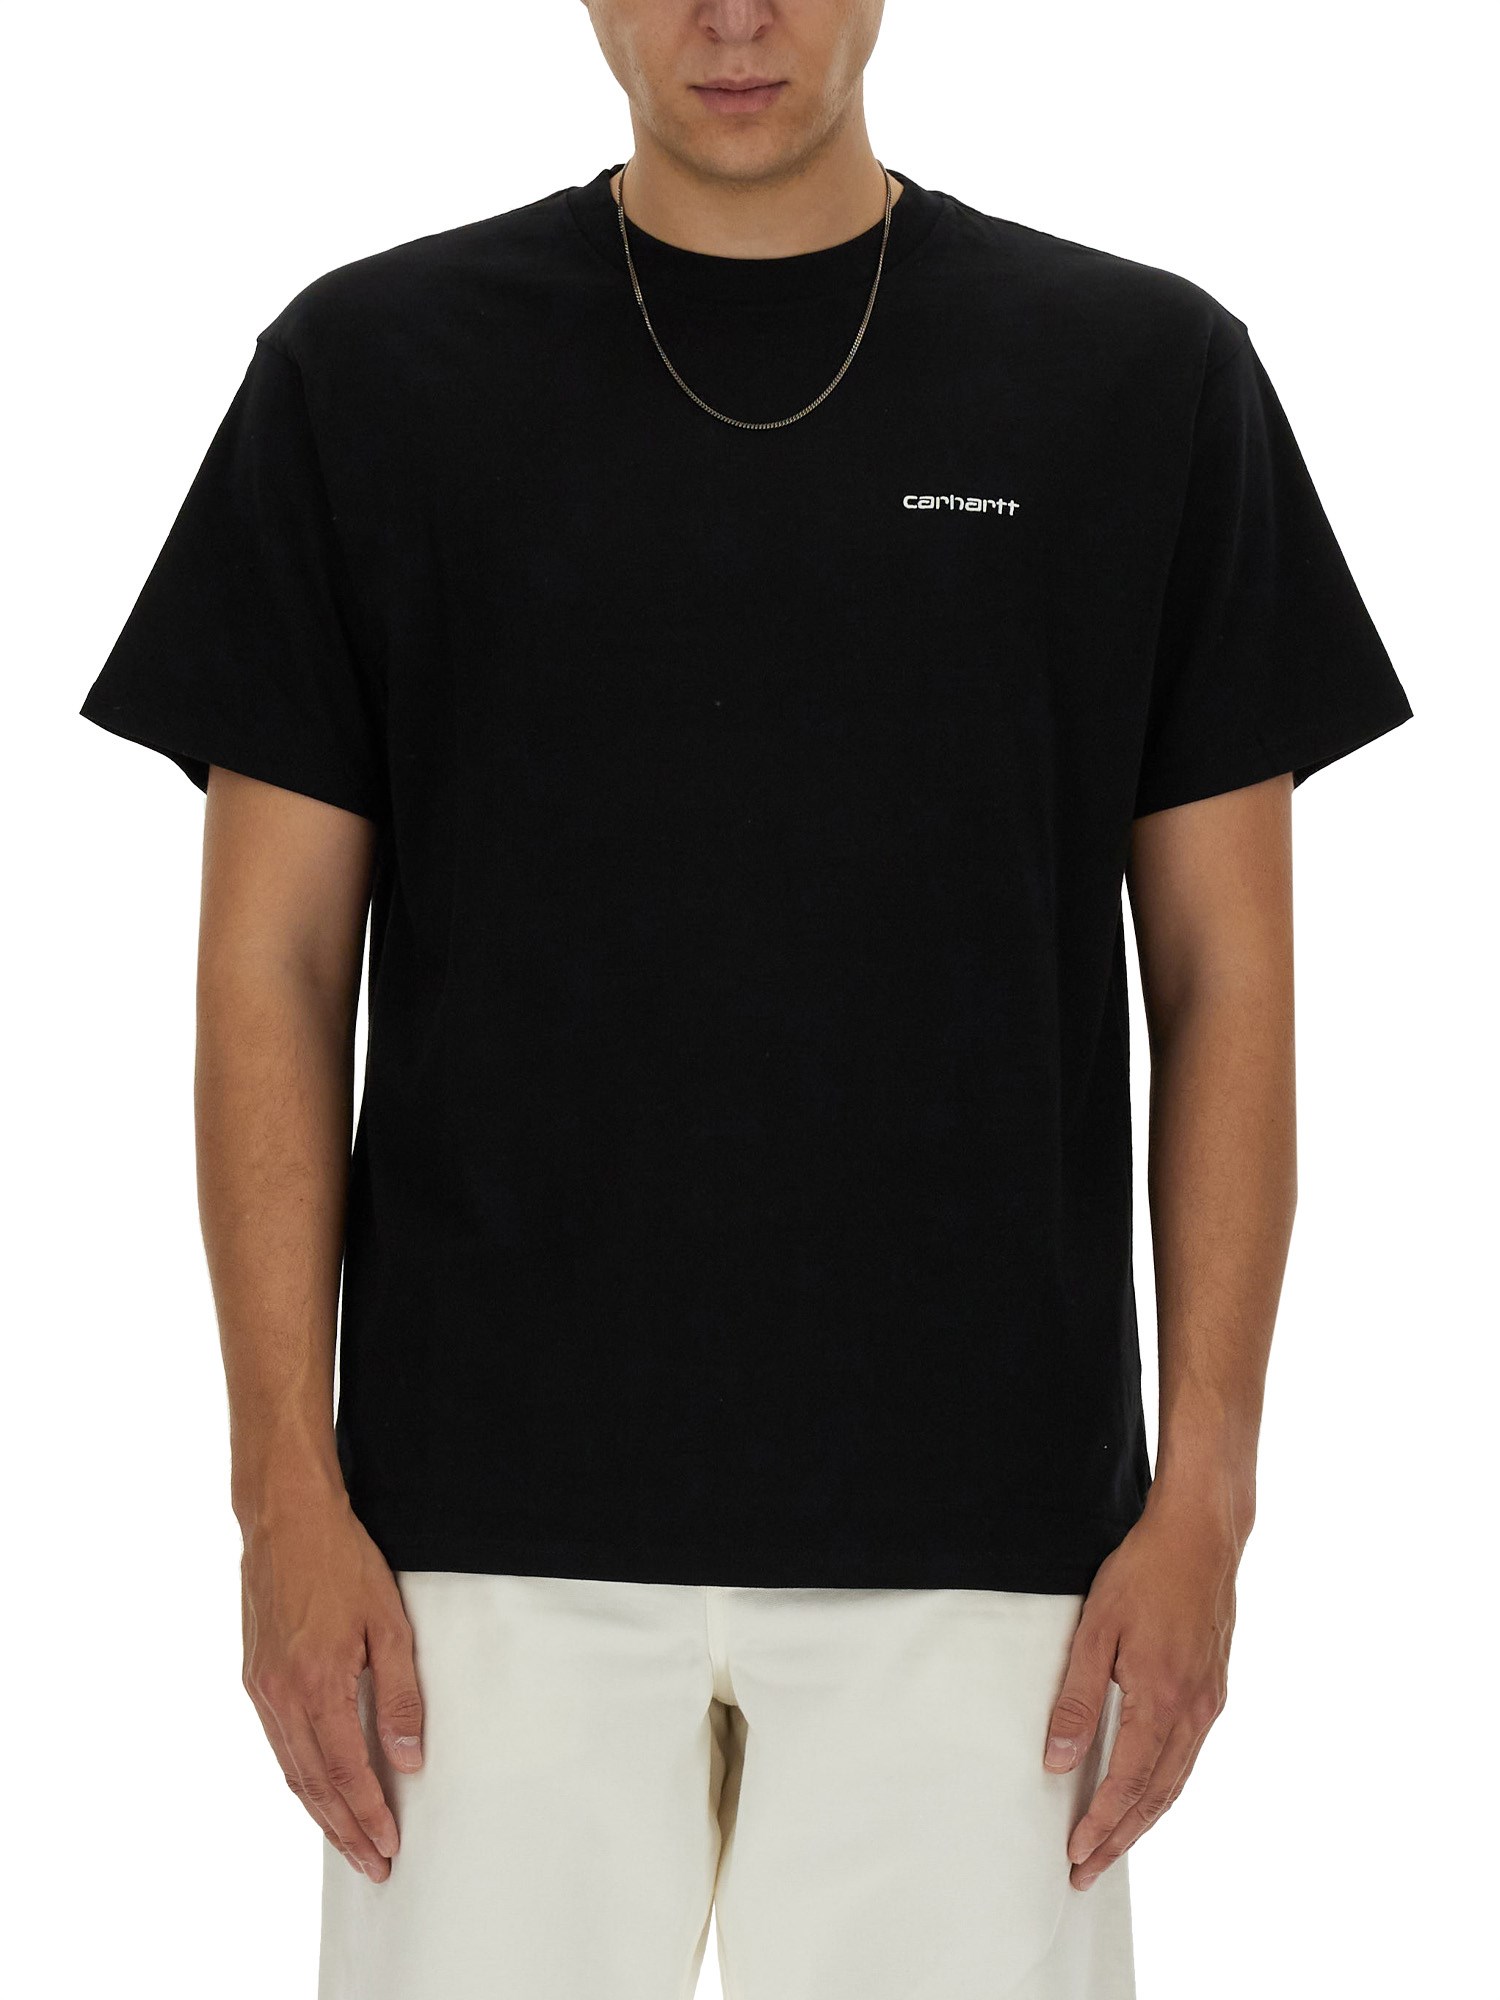 Carhartt WIP carhartt wip t-shirt with logo embroidery